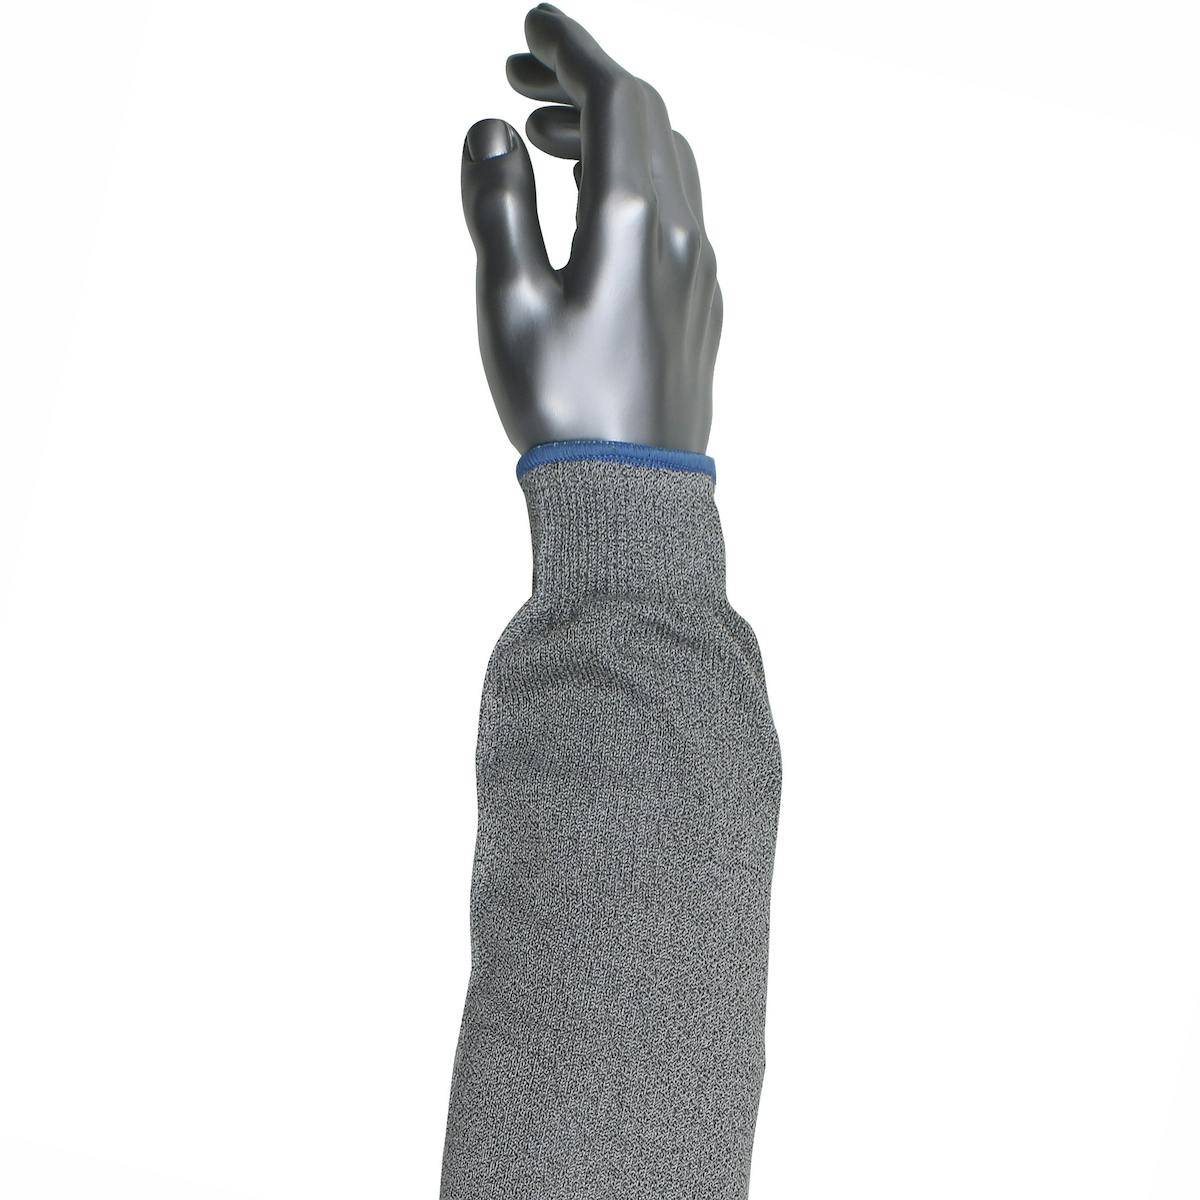 Single-Ply HPPE / Steel Blended Sleeve with Antimicrobial Fibers, Gray (MS2696) - 14